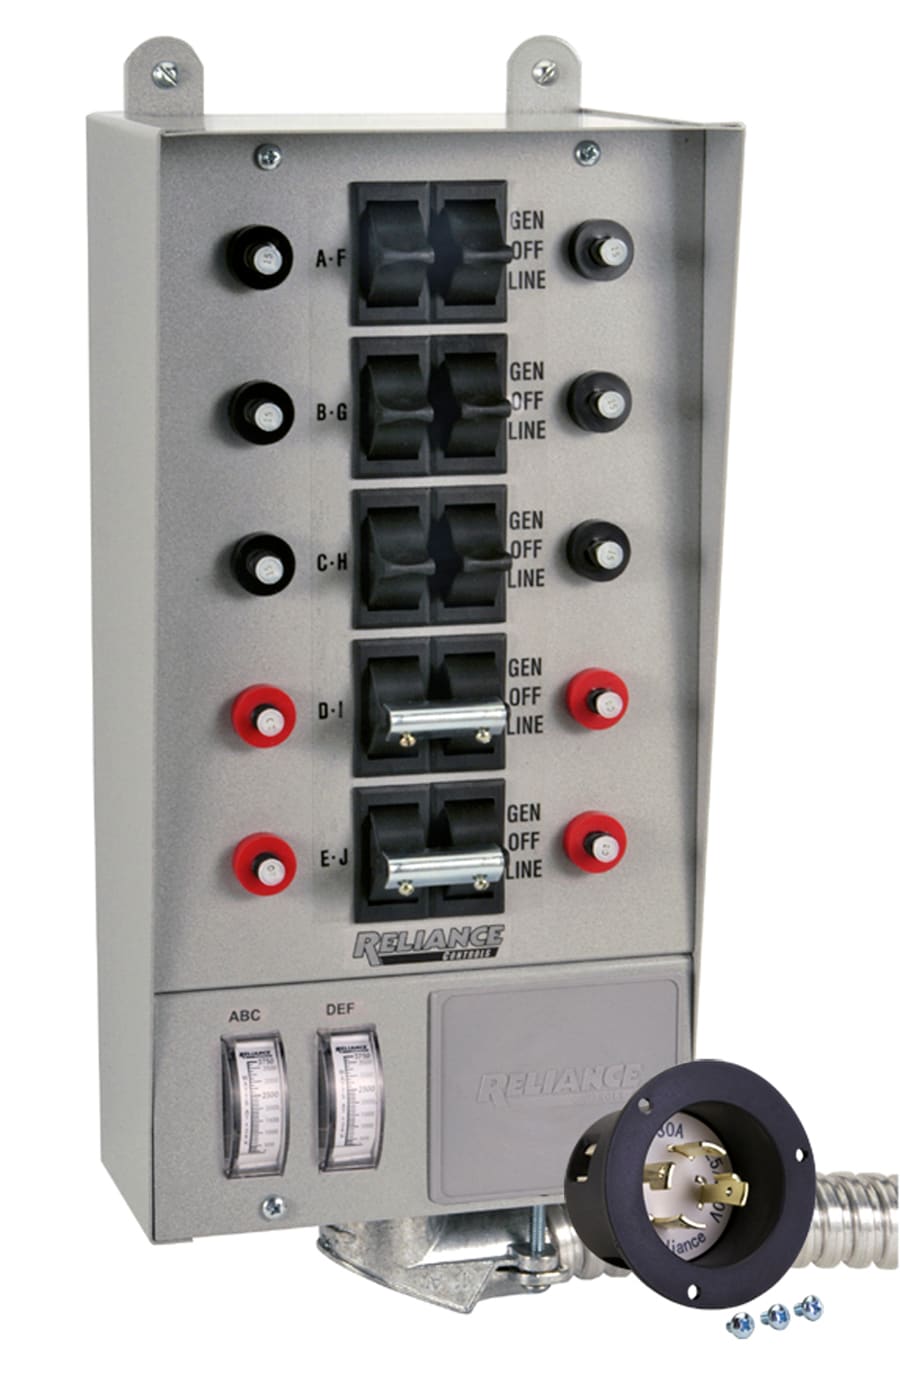 Reliance Controls Corporation 30310A Pro/Tran 30-Amp Indoor Transfer Switch for Generators Up to 7,500 Running Watts